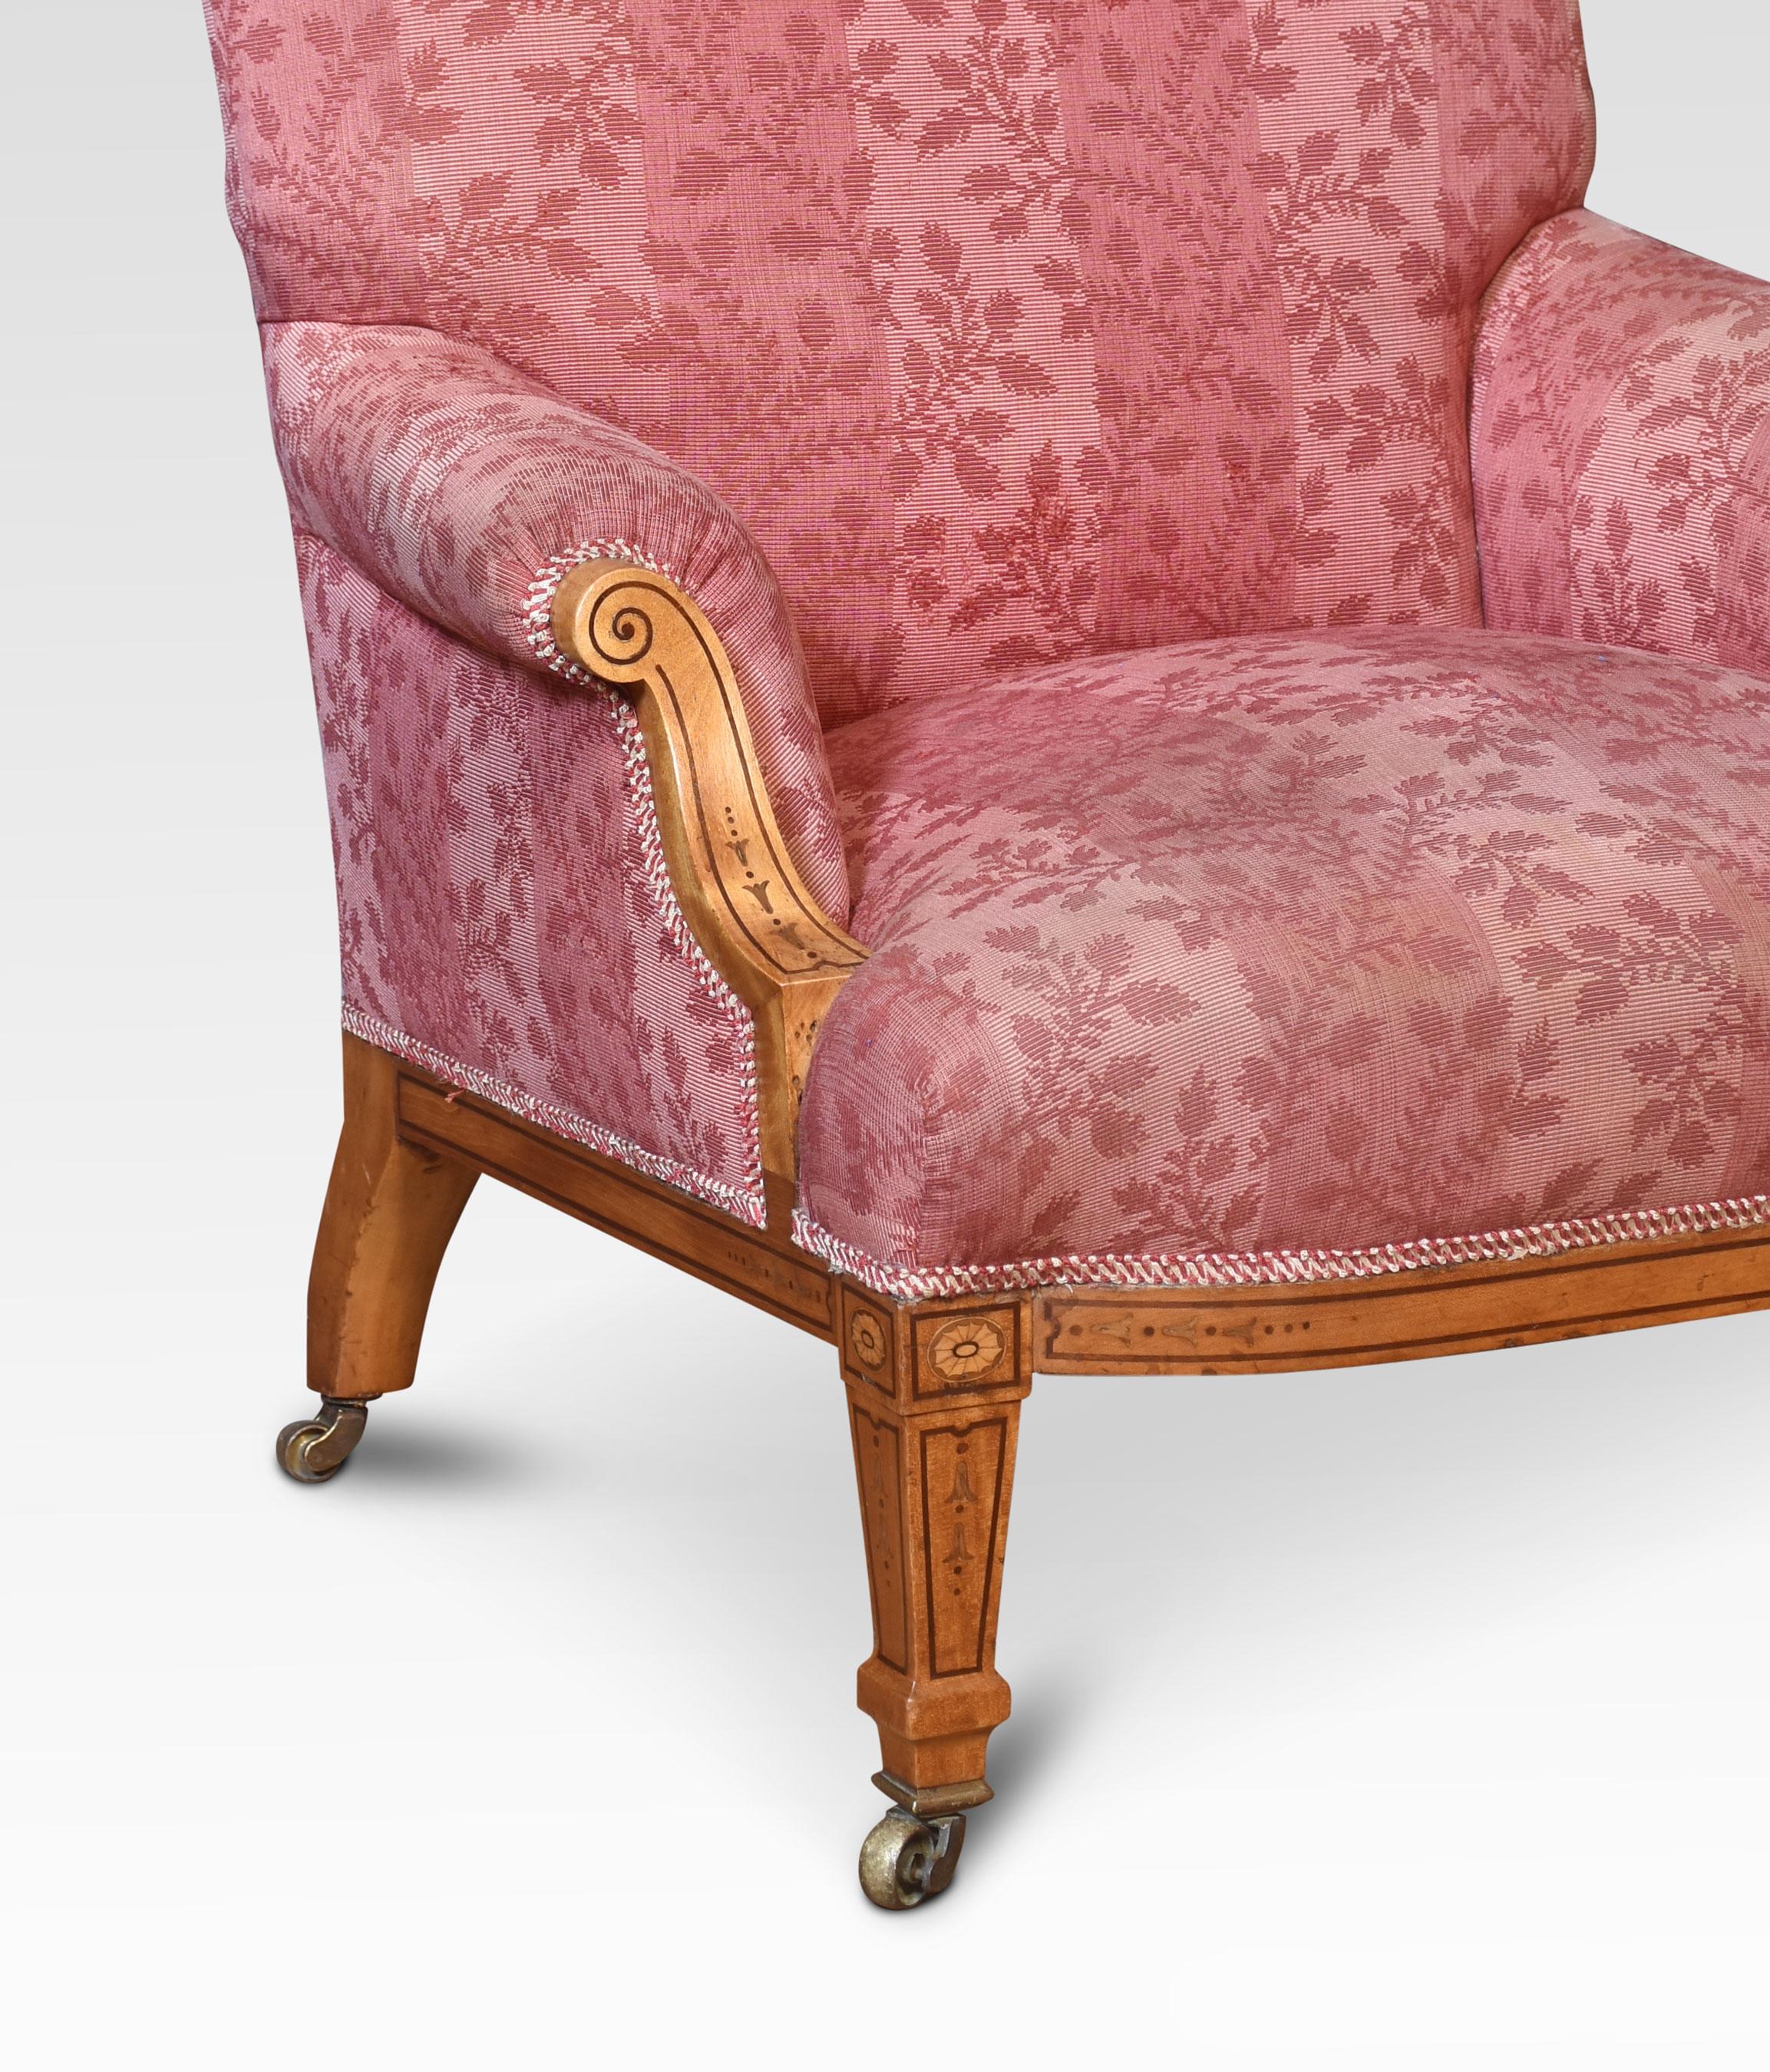 Pair of 19th-century graduated satinwood Lounge chairs, the shaped backs and overstuffed scrolling arms and seat upholstered in damask, the Upholstery is worn with some marks. Raised up on satinwood frame with inlaid detail terminating in brass